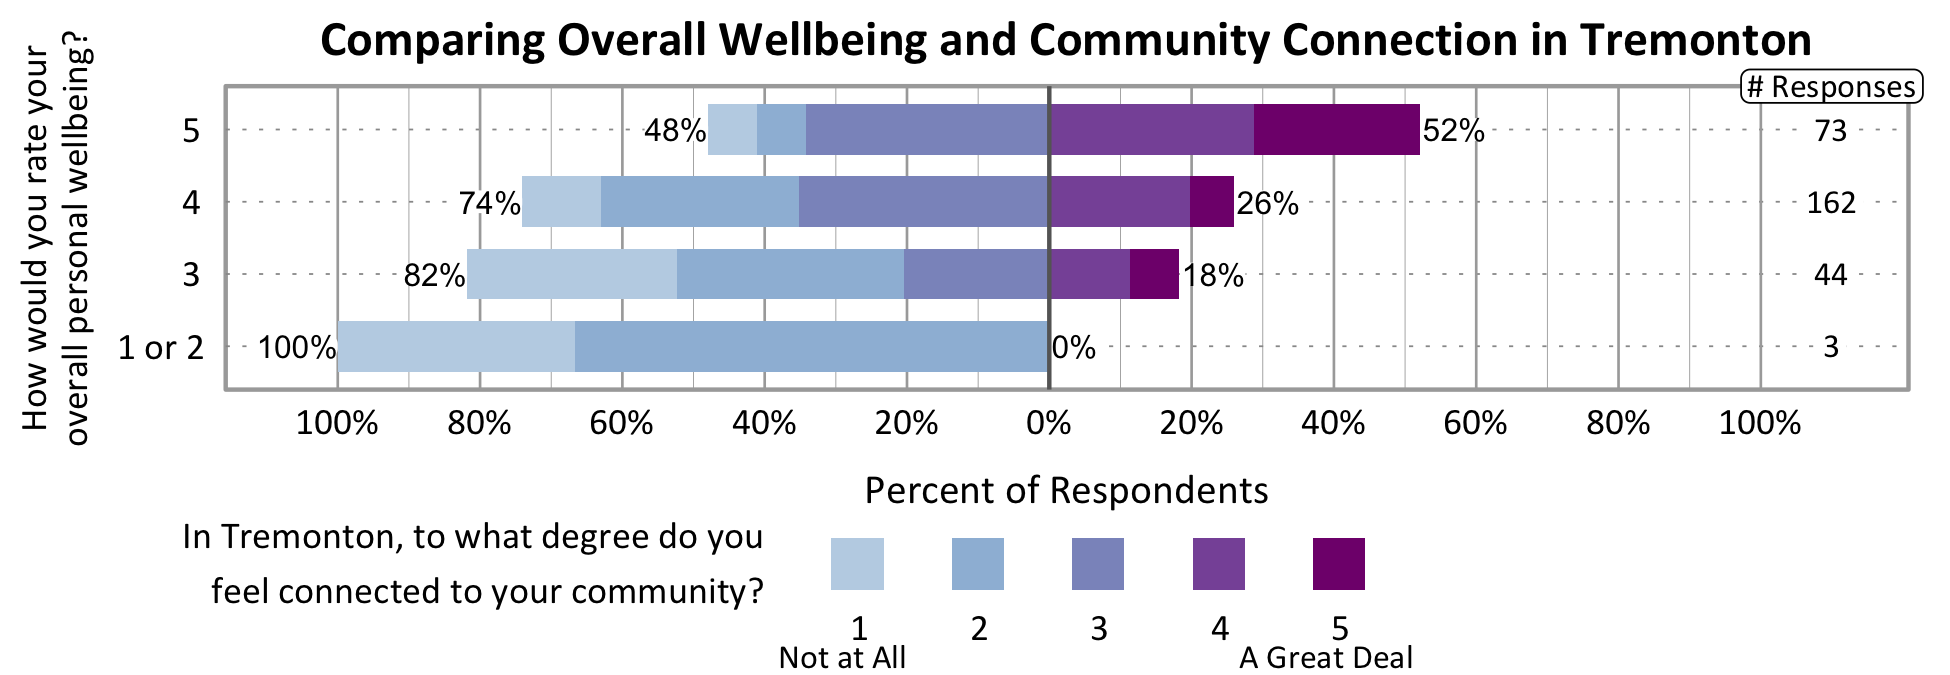 Likert Graph. Title: Comparing Overall Wellbeing and Community Connection in Tremonton. Of the 3 respondents that rate their overall personal wellbeing as a 1 or 2, 100% indicate a community connection score of 1, 2, or 3 while 0% indicate a community connection score of 4 or 5. Of the 44 respondents that rate their overall personal wellbeing as a 3, 82% indicate a community connection score of 1, 2, or 3 while 18% indicate a community connection score of 4 or 5. Of the 162 respondents that rate their overall personal wellbeing as a 4, 74% indicate a community connection score of 1, 2, or 3 while 26% indicate a community connection score of 4 or 5. Of the 73 participants that rate their overall wellbeing as a 5, 48% indicate a community connection score of 1, 2, or 3 while 52% indicate a community connection score of 4 or 5.